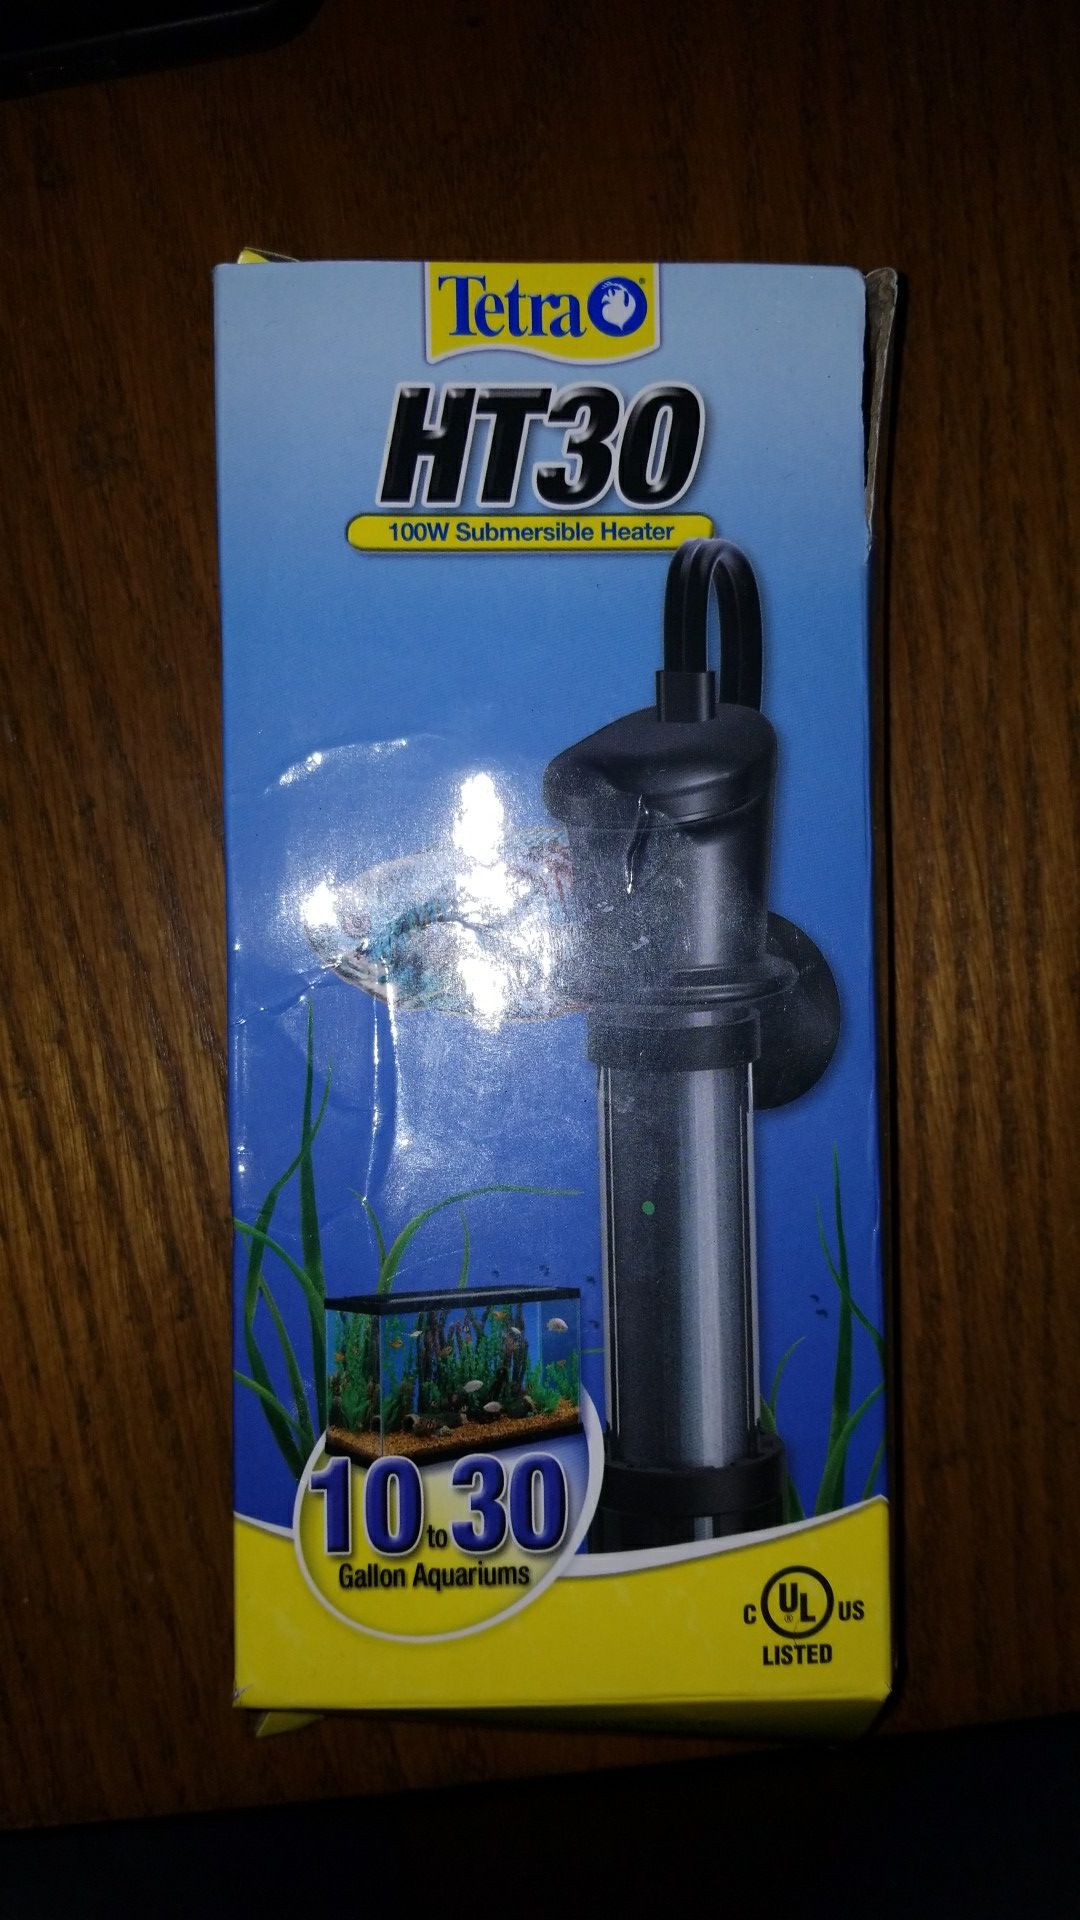 Tetra HT30 100w submersible heater